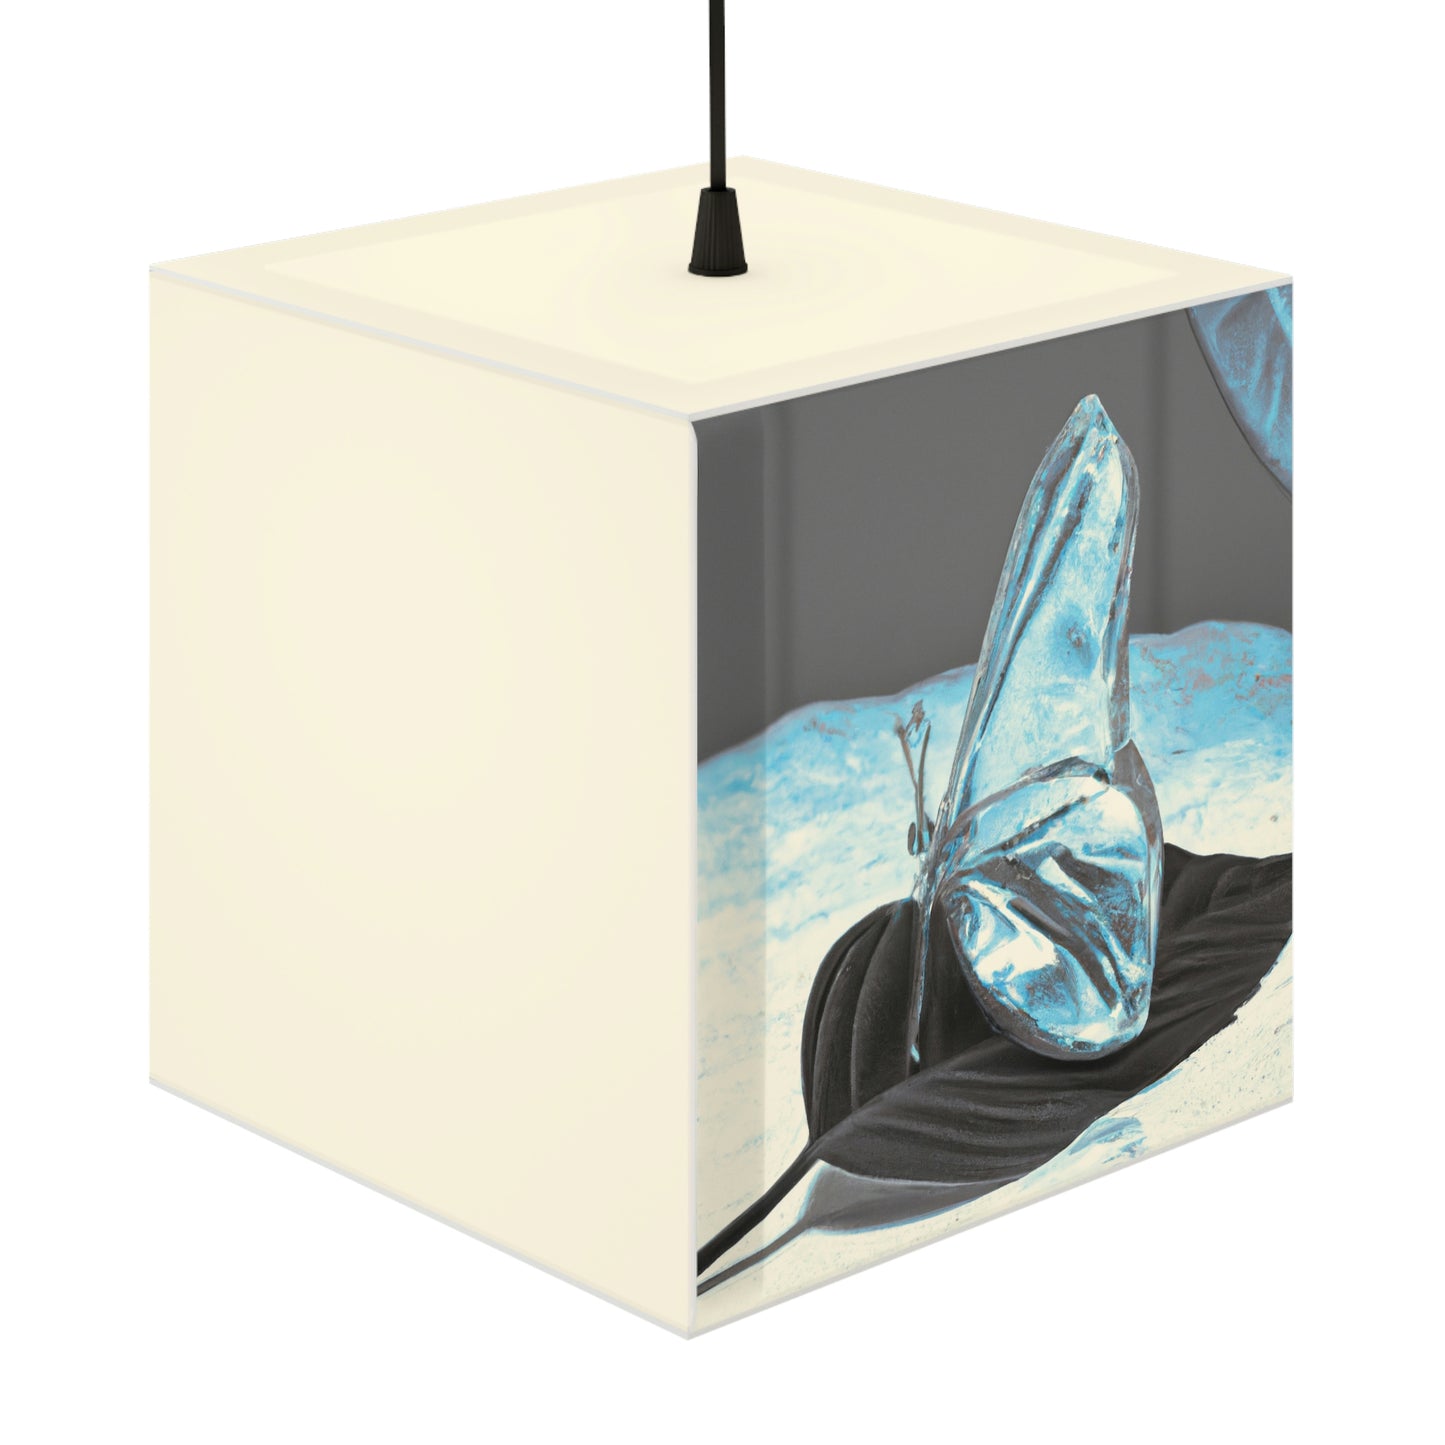 "Wishing for the Sky: A Crystal Butterfly's Dream" - The Alien Light Cube Lamp